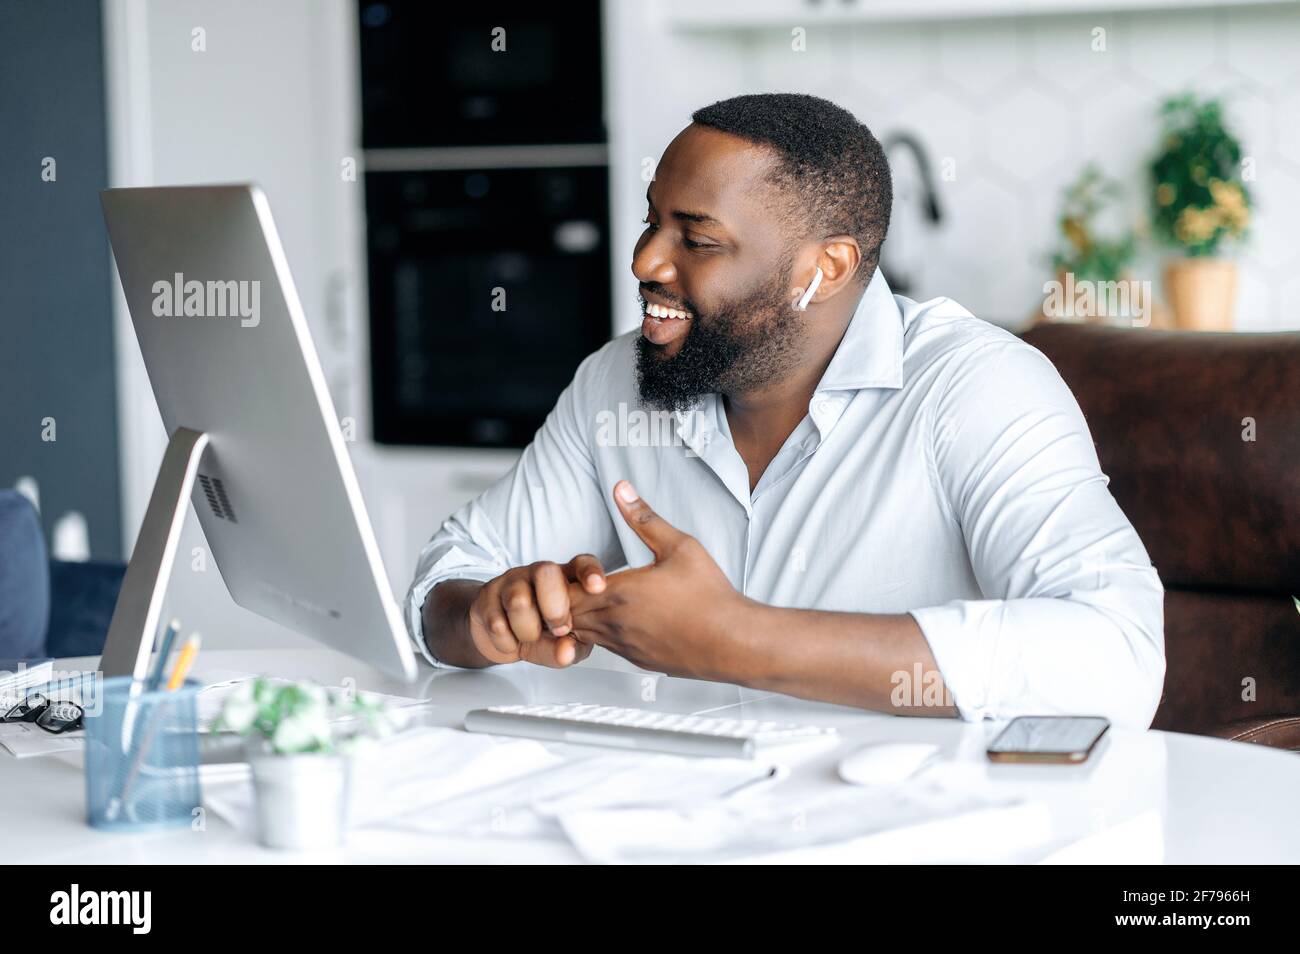 Joyful pleasant successful african american man, lawyer or real estate agent working remotely at computer, talking to colleague or customer via video call uses wireless headset, smiling friendly Stock Photo